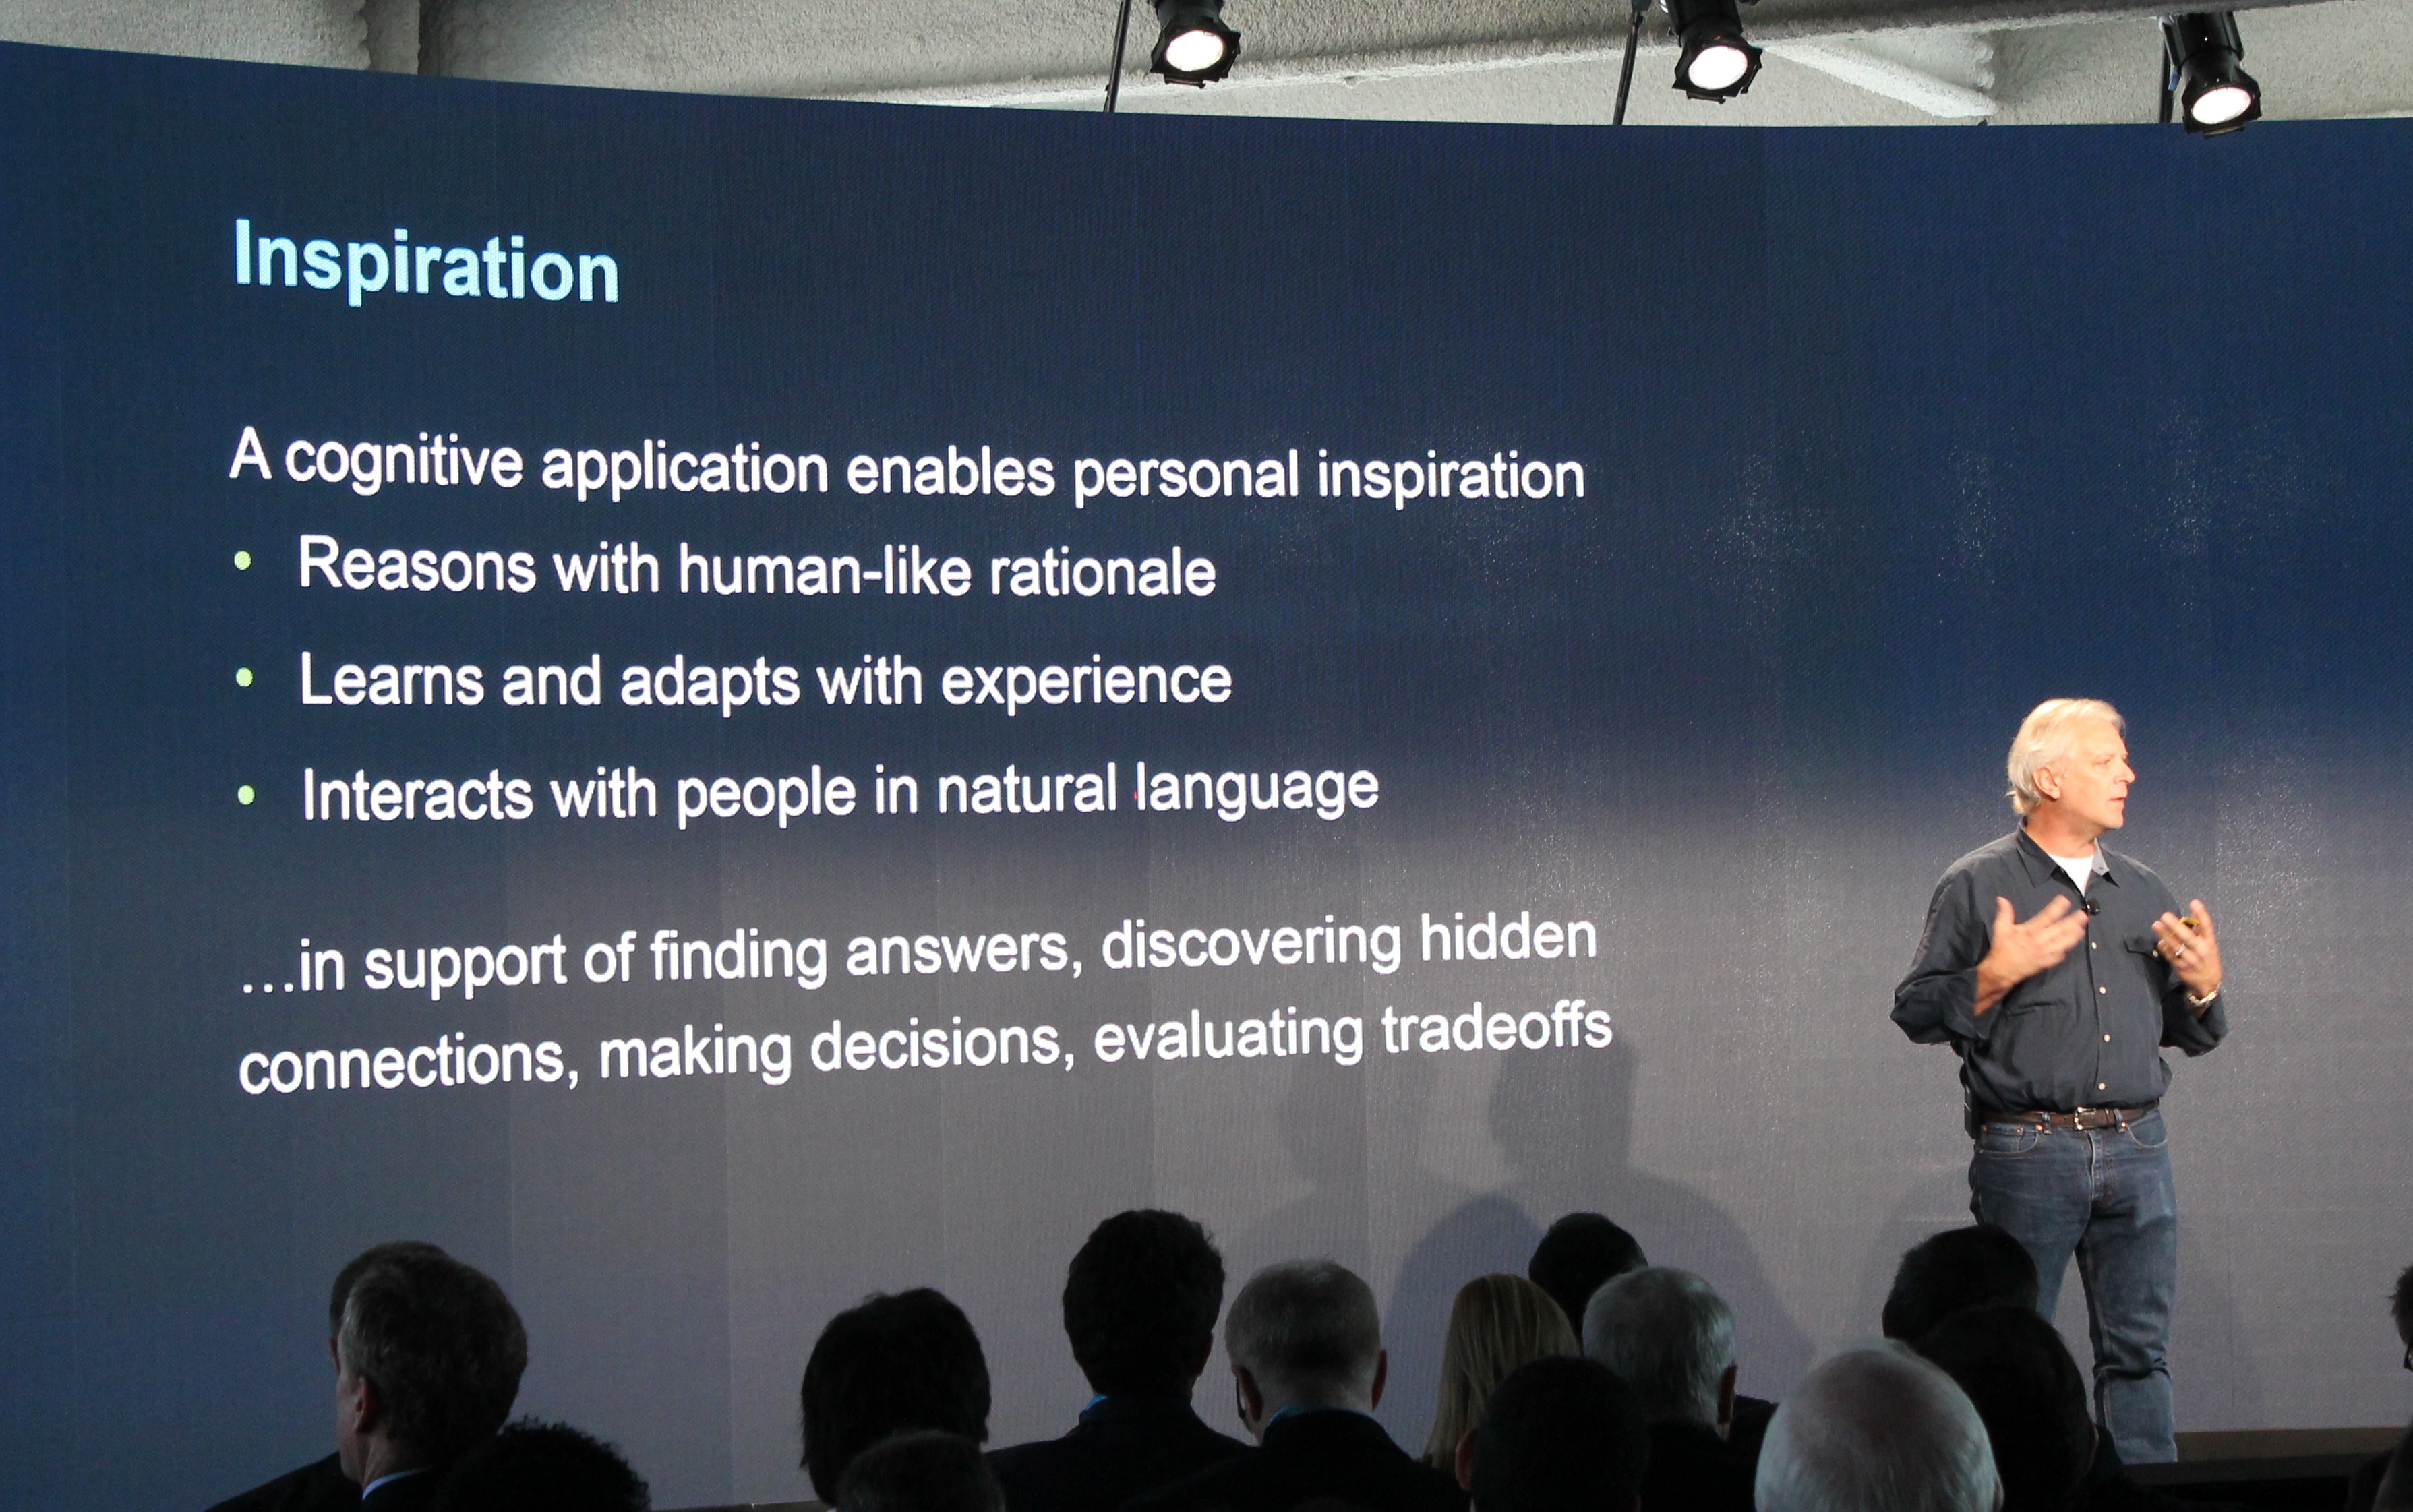 Talking tech: Watson uses "natural language" to interact with people.